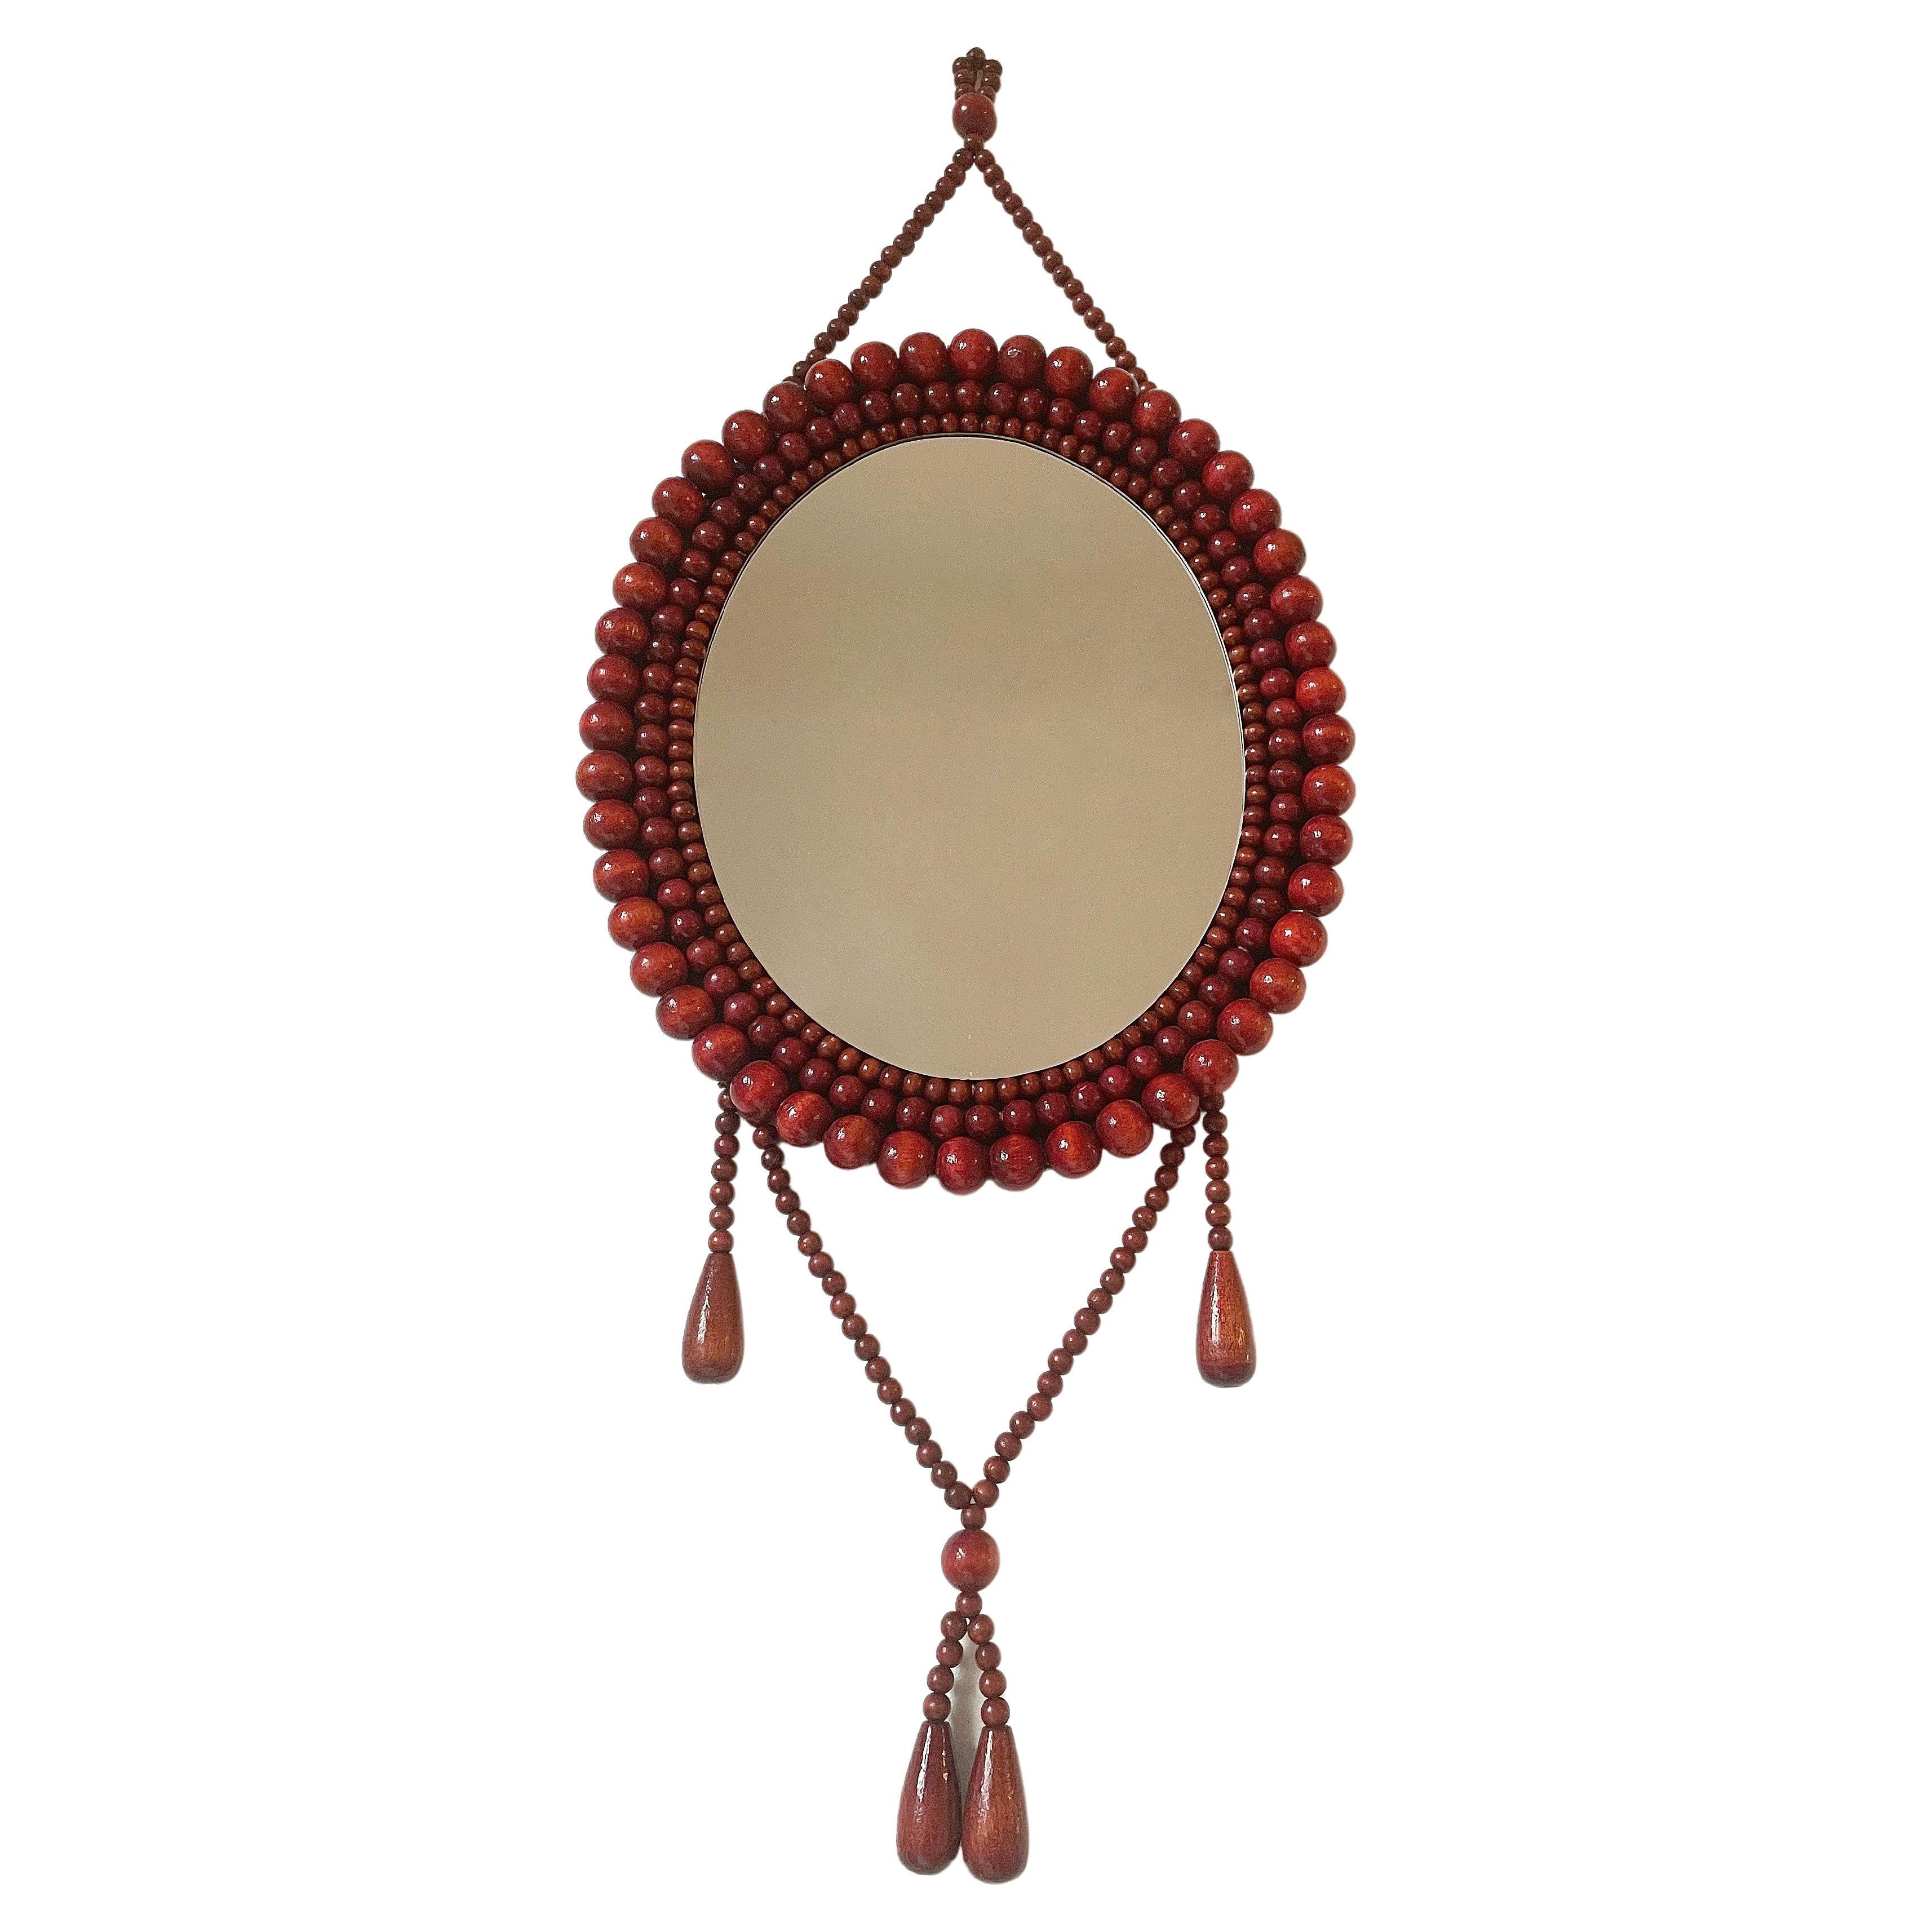 Finnish wall mirror in frame decorated with brown and mahogany shiny lacquered wooden beads in different sizes in the style of Aarikka. Mirror and beads in beautiful condition. Mounted on a wooden plate in matte dark brown. A Scandinavian midcentury